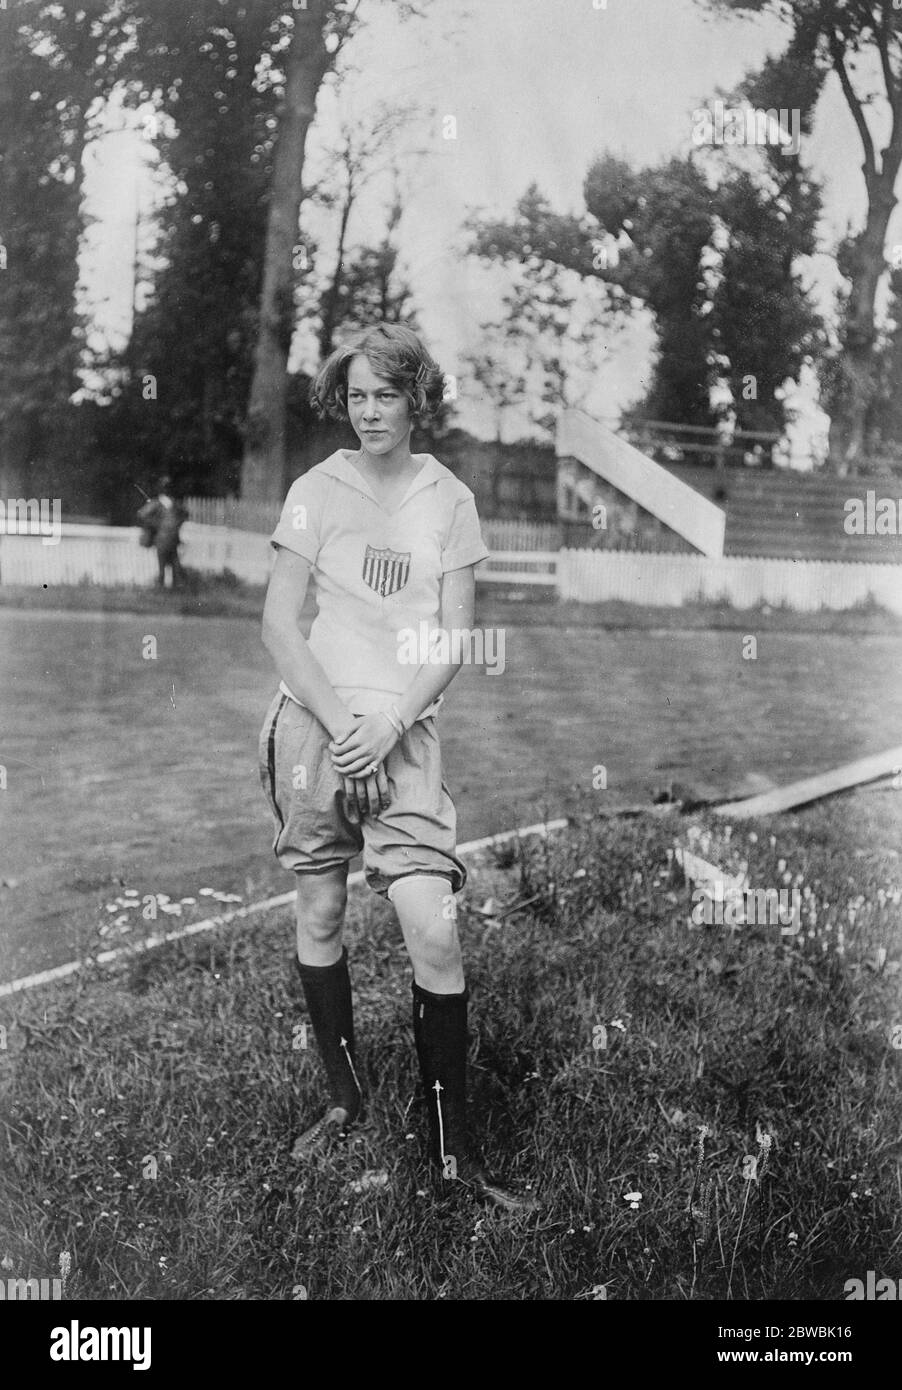 American Girls in Paris for Feminine Olympic Games Miss Nancy Voorhees , the long jump champion  12 April 1922 Stock Photo